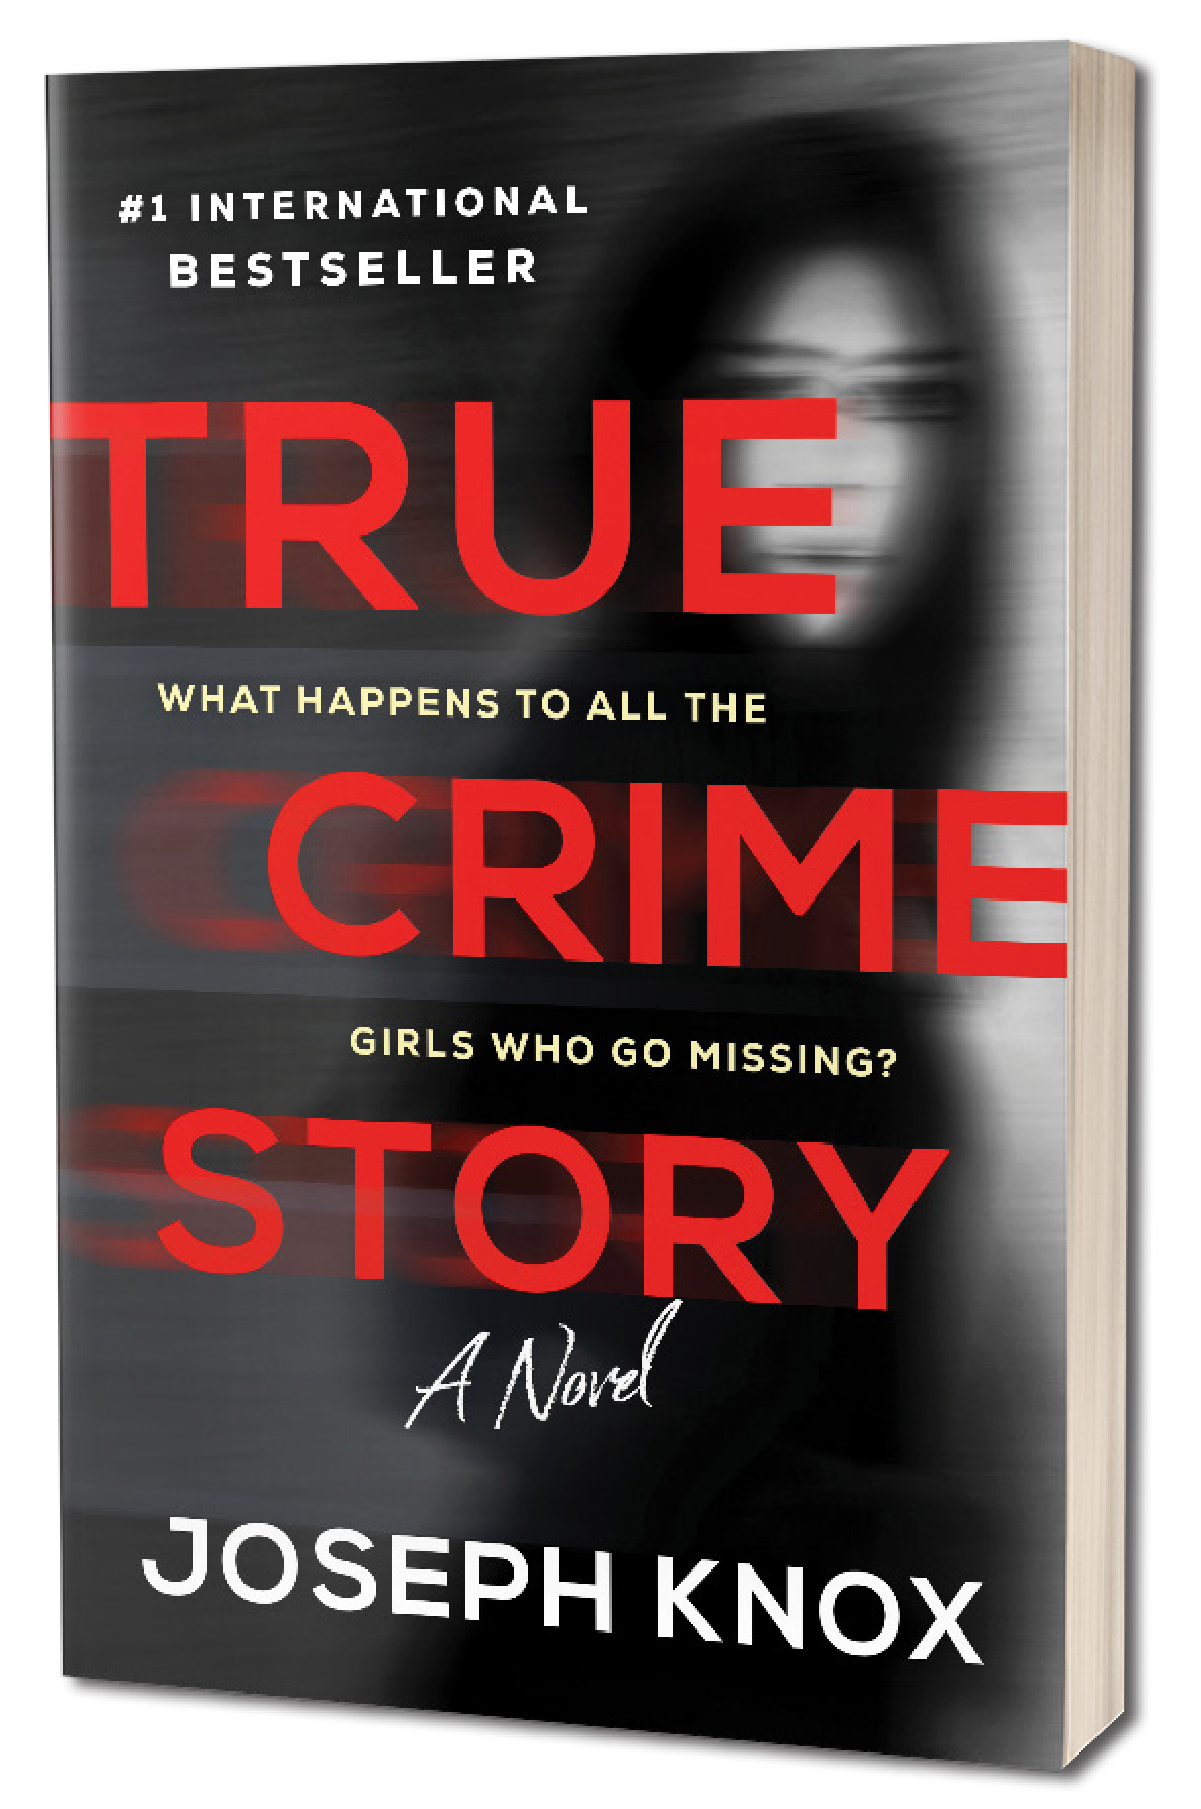 Book Cover for "true Crime Story" by Joseph Knox